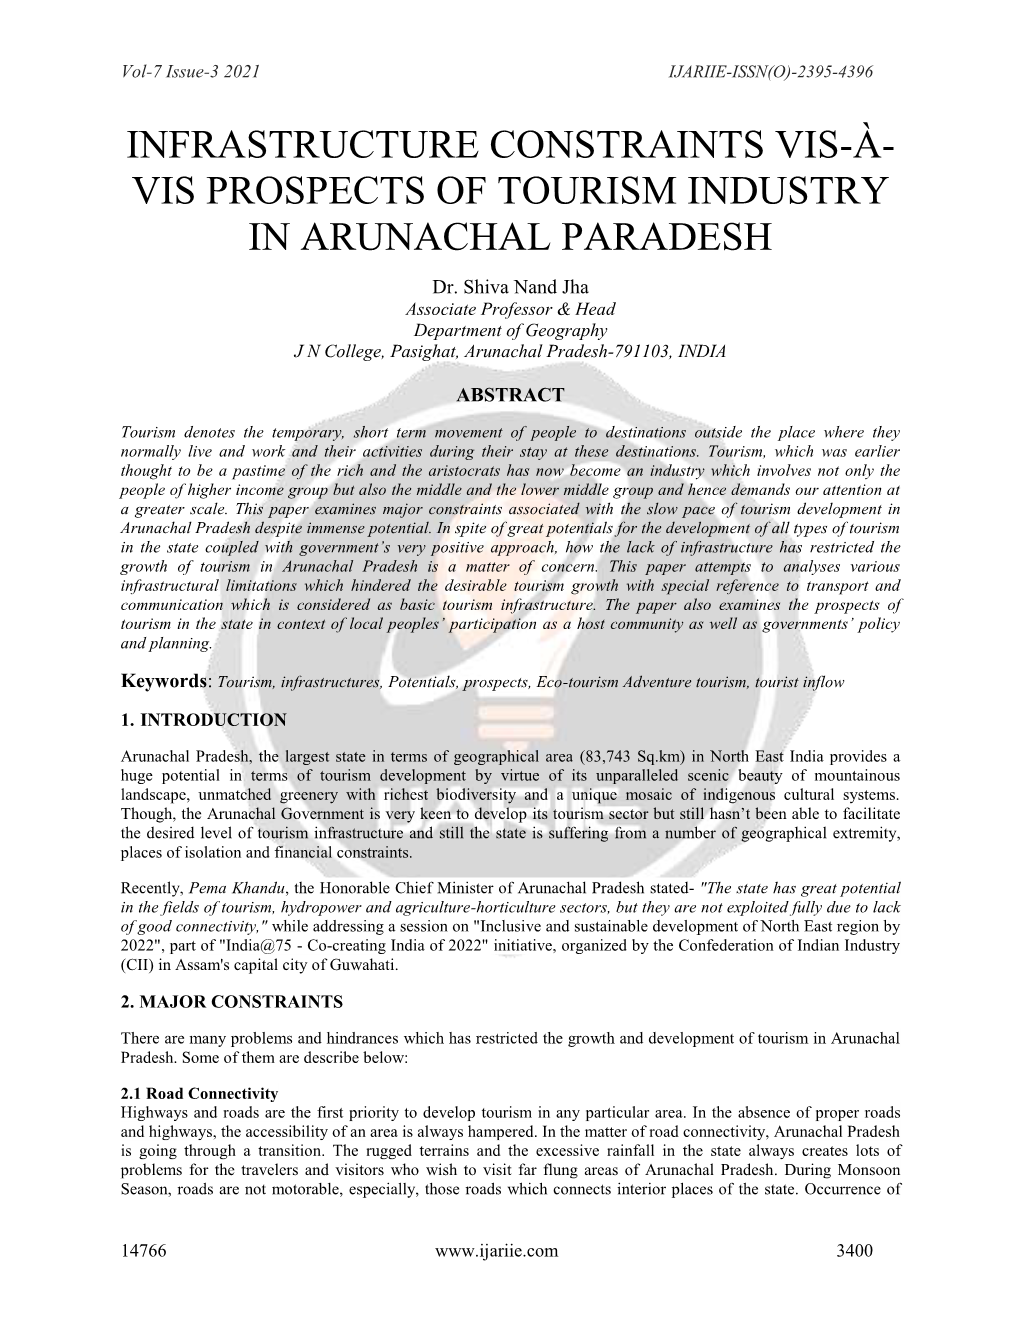 INFRASTRUCTURE CONSTRAINTS VIS-À- VIS PROSPECTS of TOURISM INDUSTRY in ARUNACHAL PARADESH Dr